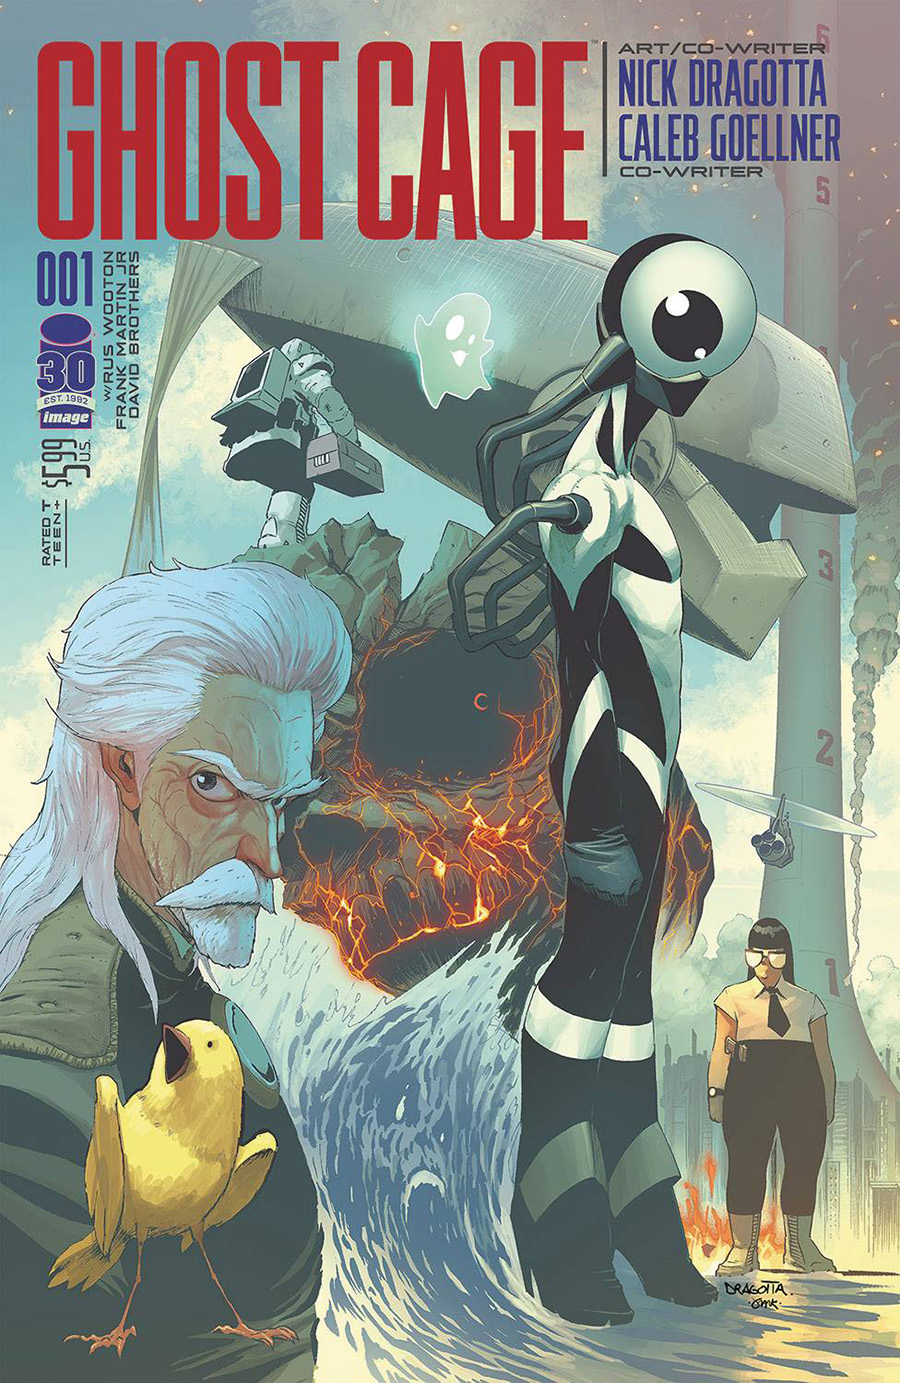 Ghost Cage #1 Cover A